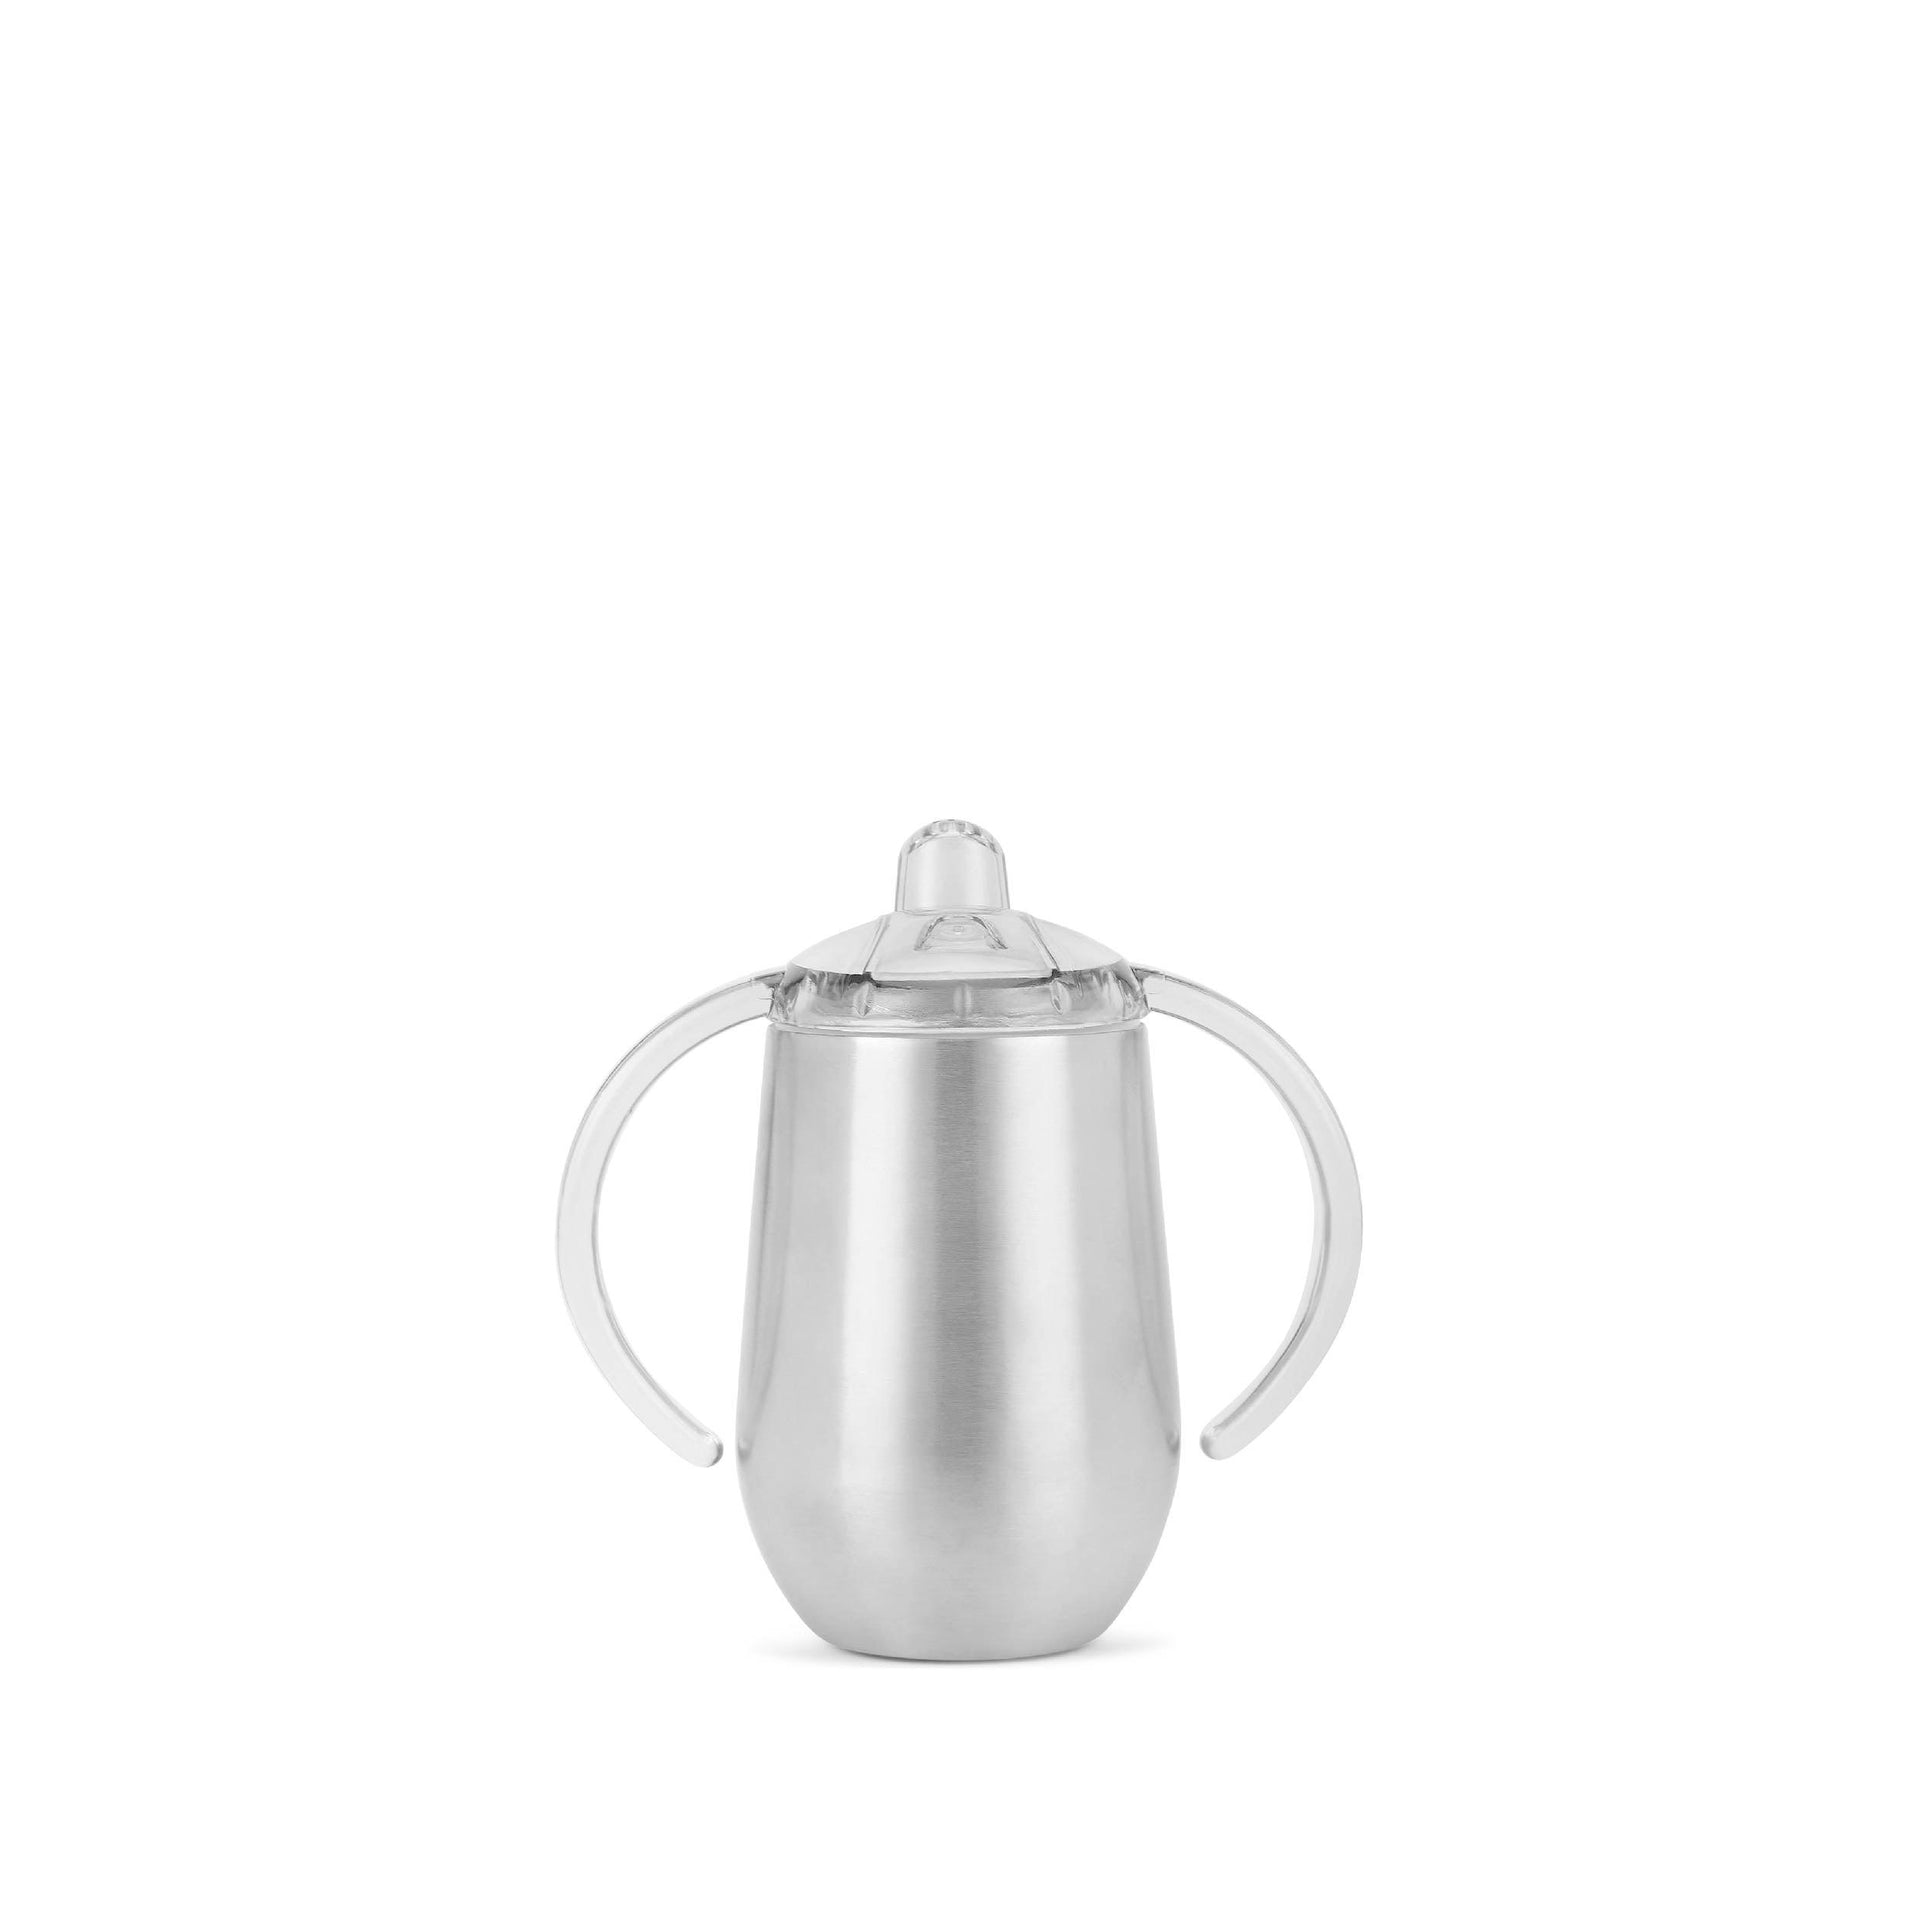 8oz Sublimation Baby Feeding Bottle Stainless Steel Sippy Cup With Nipple  Handle 8oz Unbreakable White Baby Nursing Bottle For Sublimation From  Cookiebag, $5.23